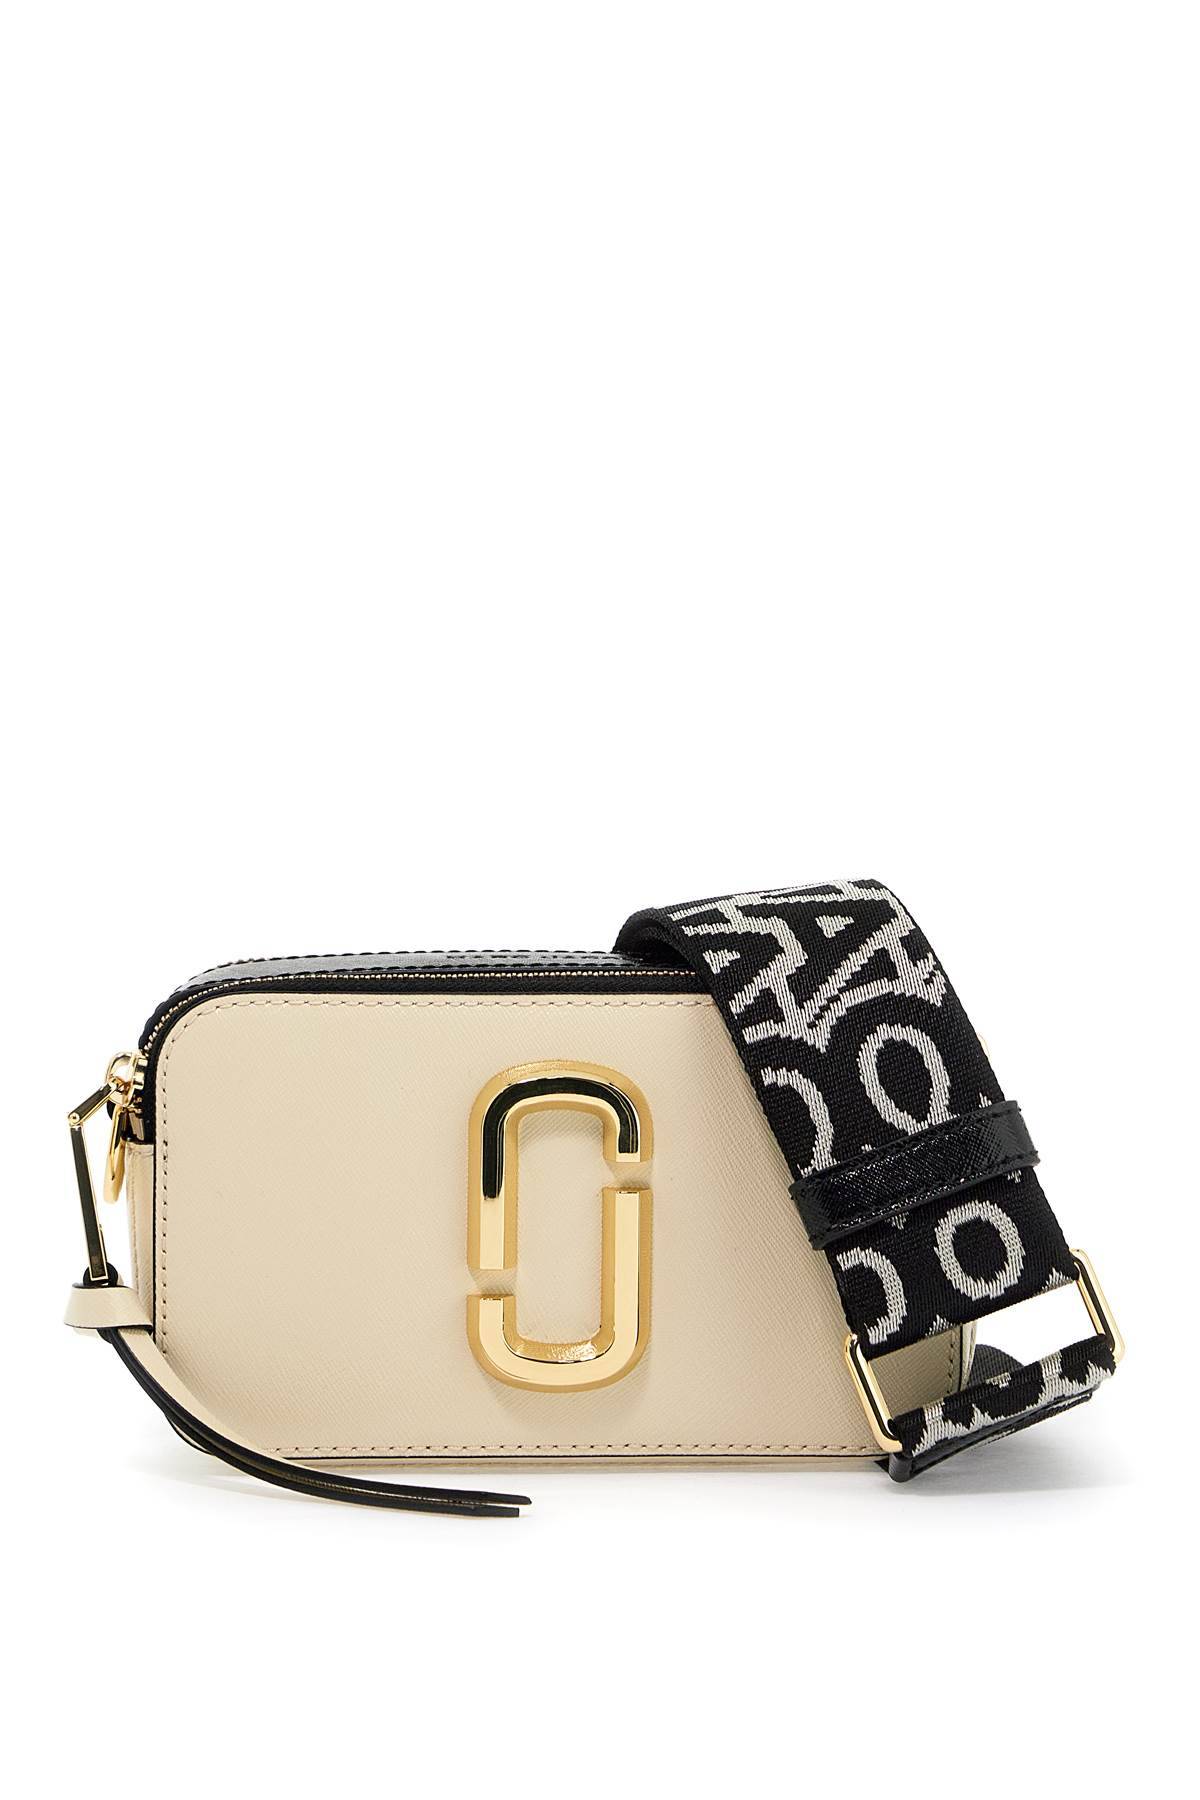 Marc Jacobs MARC JACOBS the snapshot camera bag